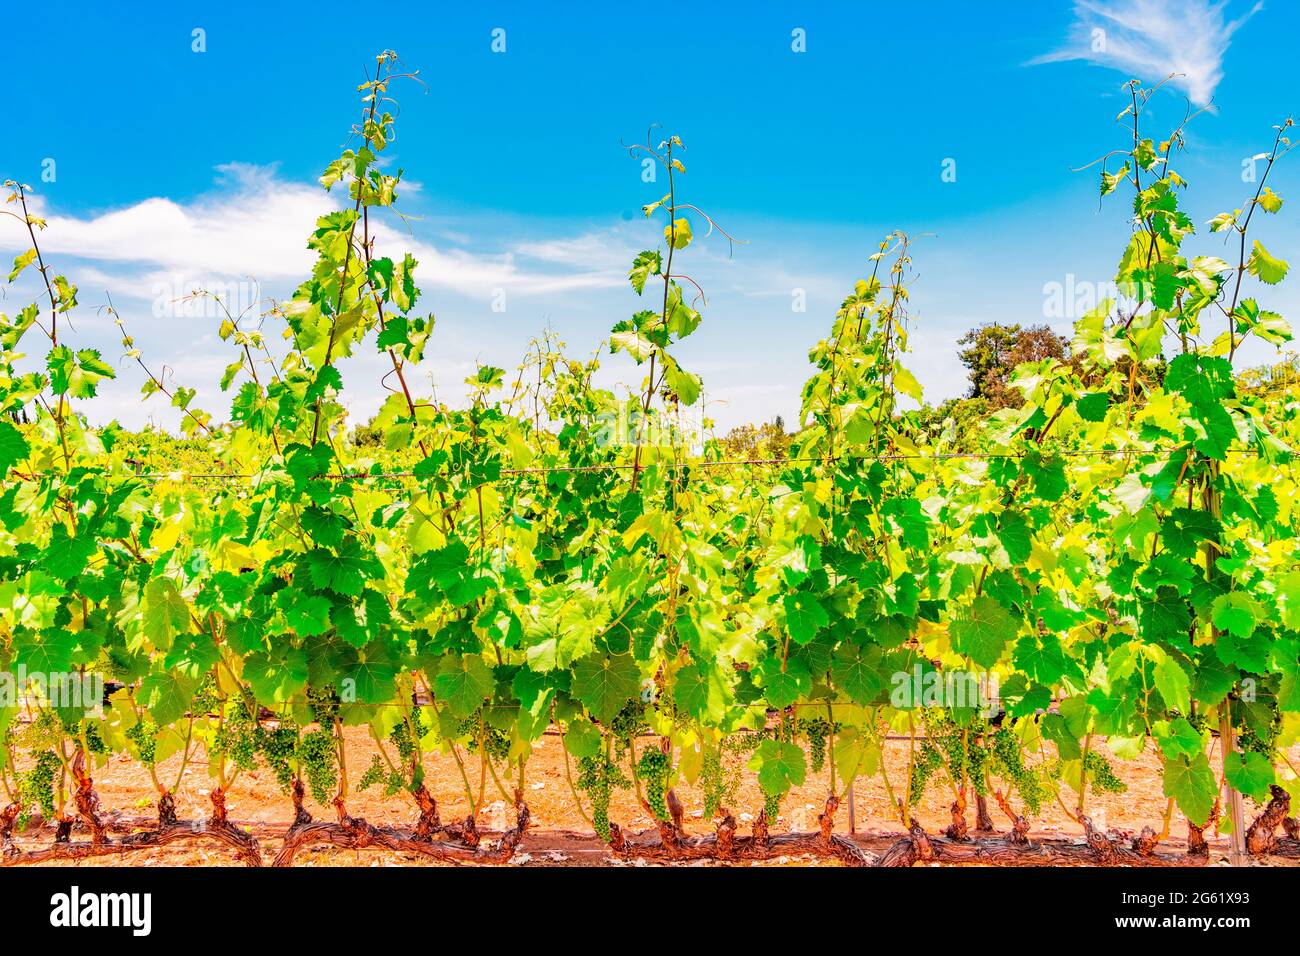 Spring vines shoot up from the branches and are filled with young grapes hanging below in San Diego County in Southern California. Stock Photo